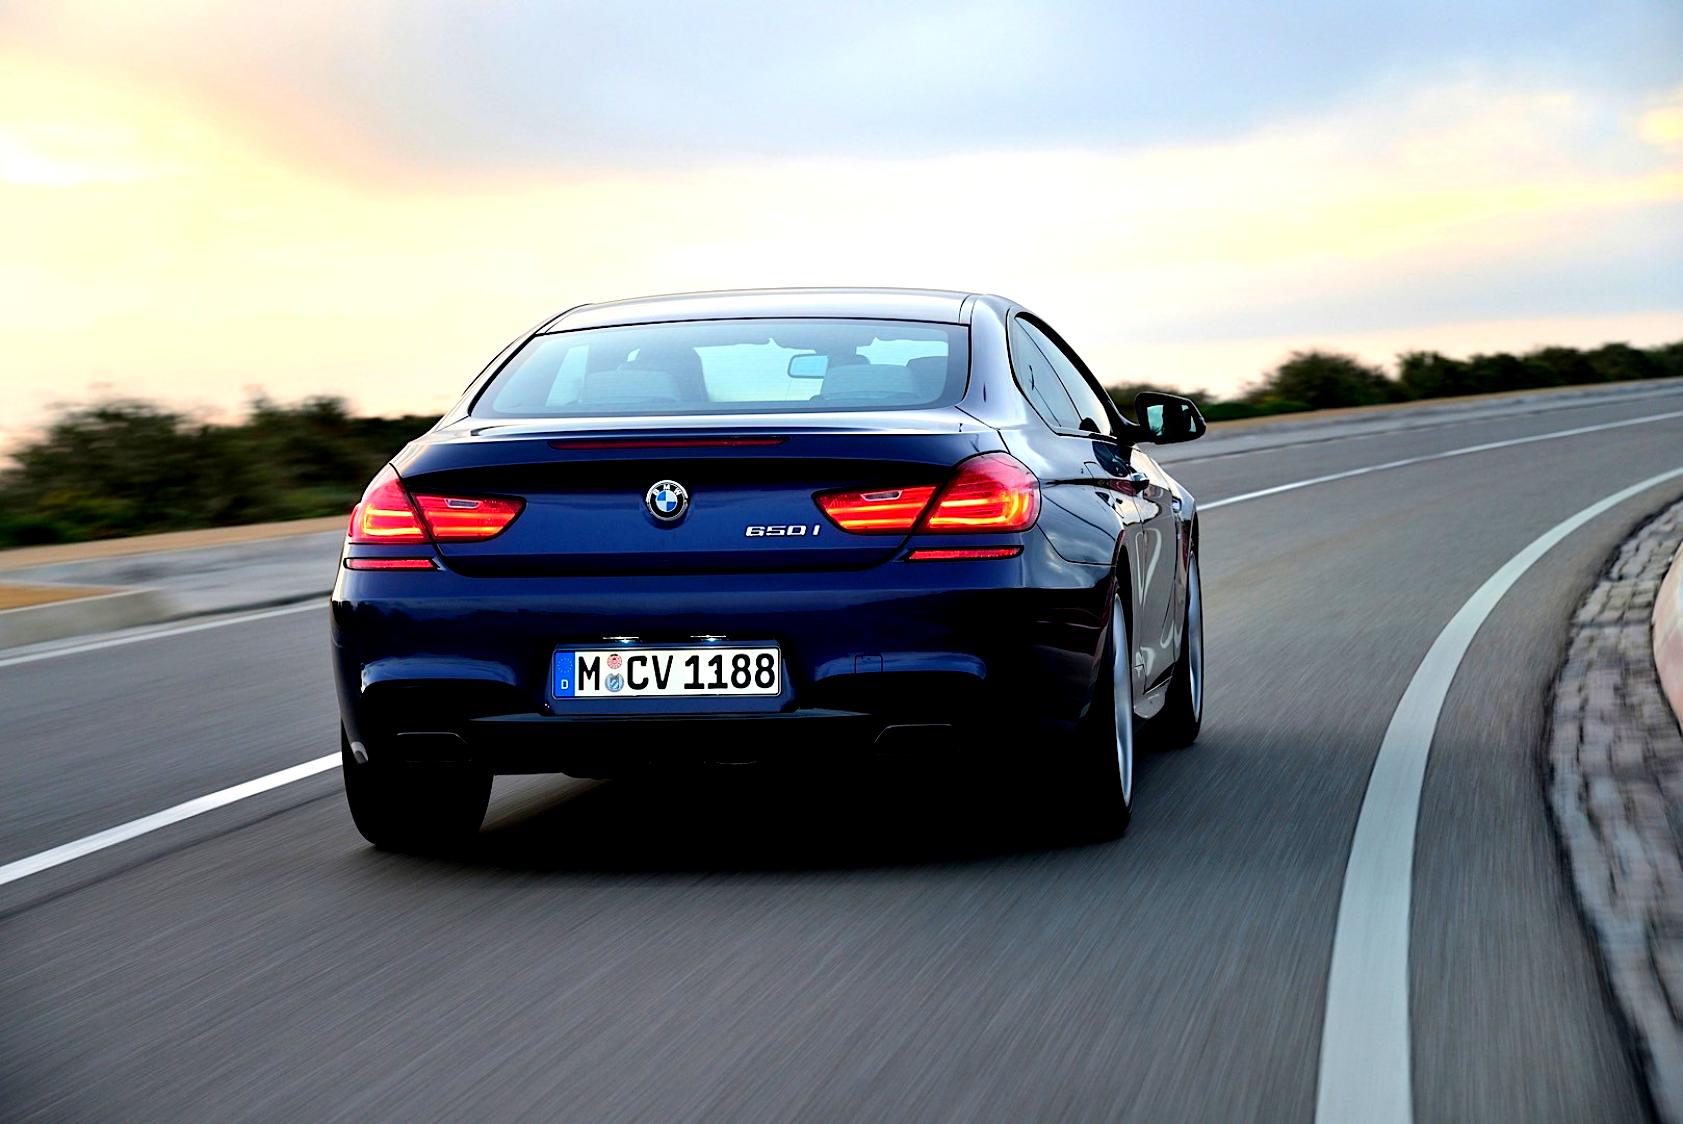 BMW 6 Series Coupe F13 2011 #23